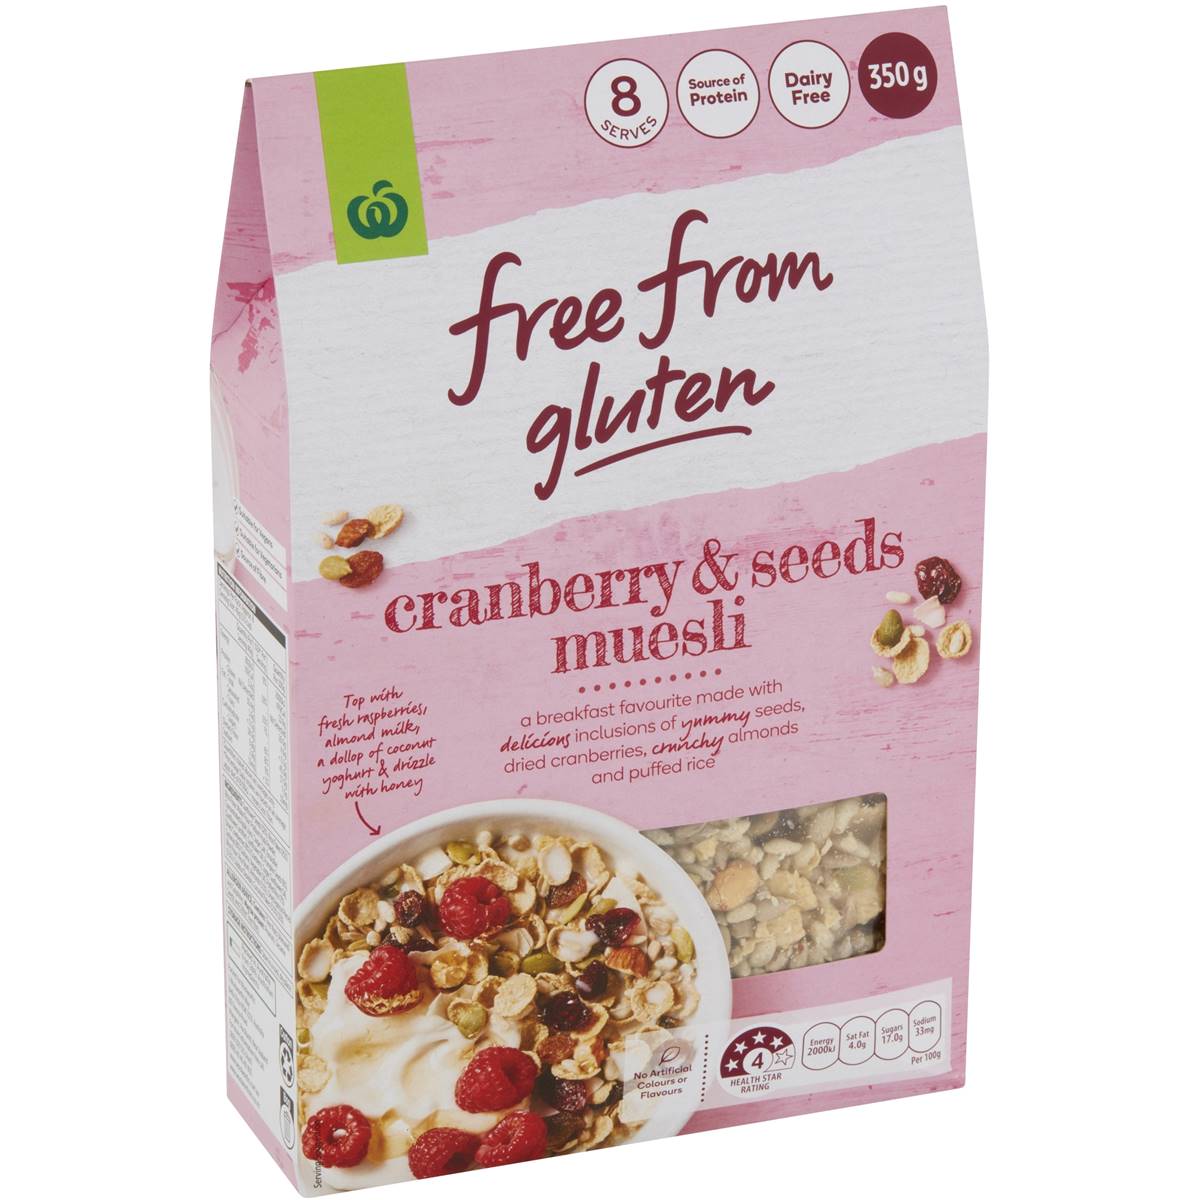 Calories in Woolworths Free From Gluten Cranberry & Seeds Muesli